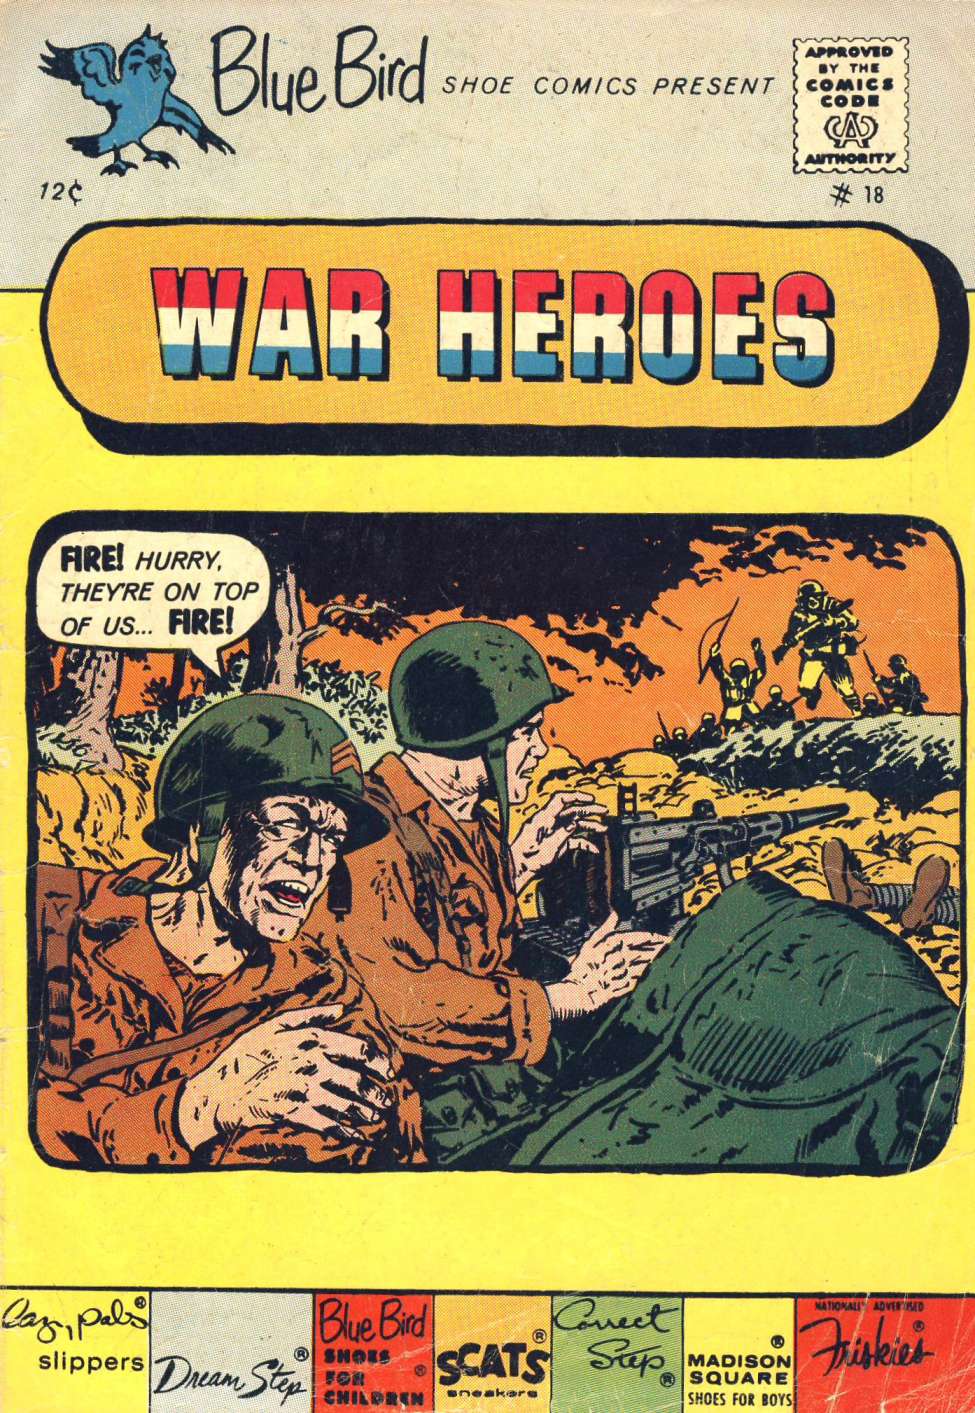 Comic Book Cover For War Heroes 18 (Blue Bird)